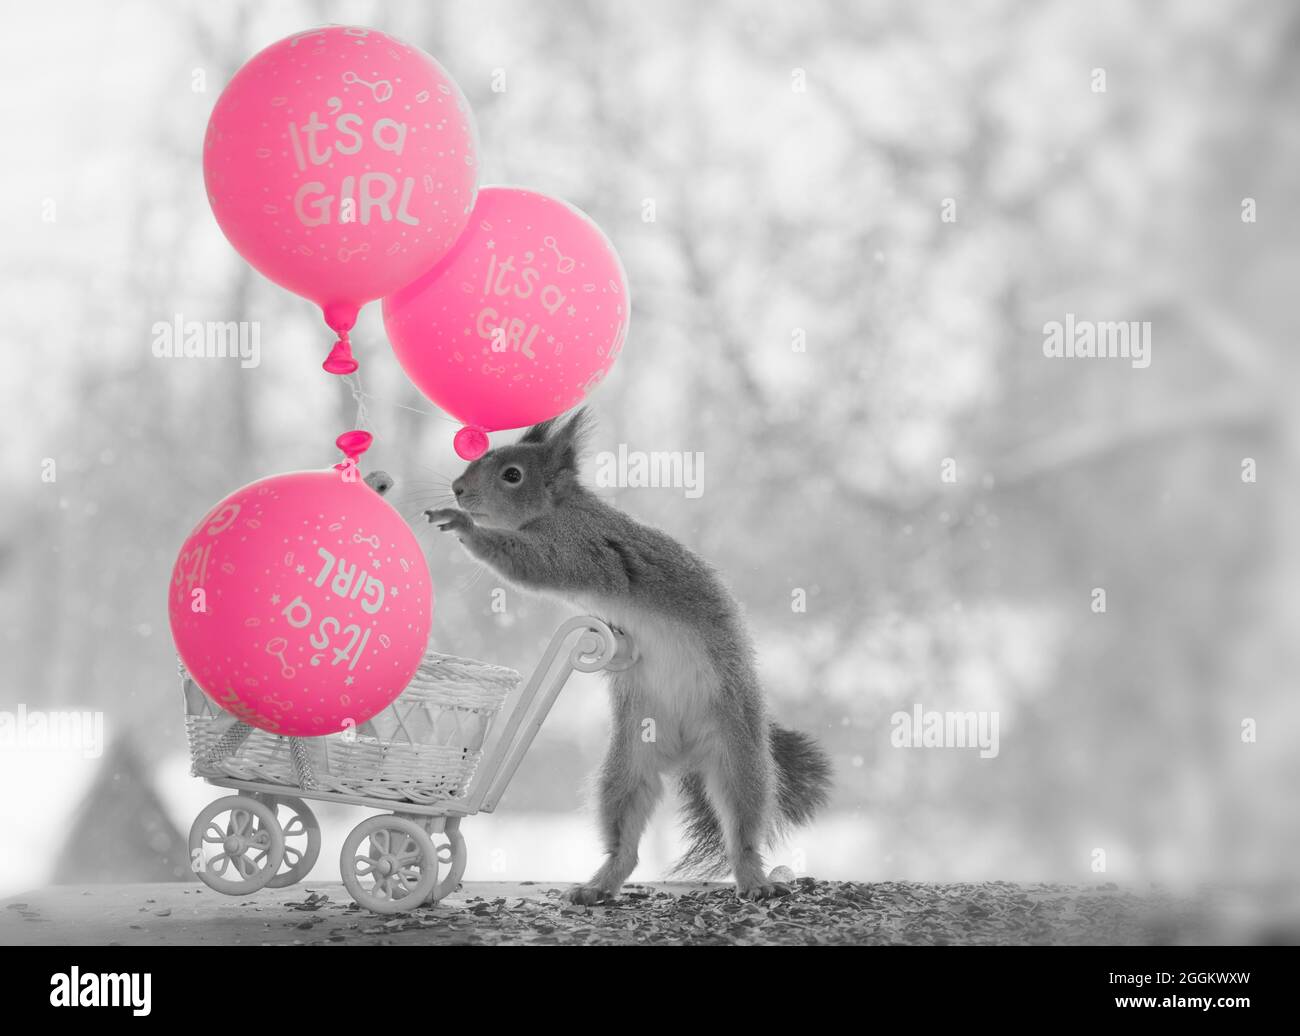 red squirrel holding an stroller reaching an balloon Stock Photo